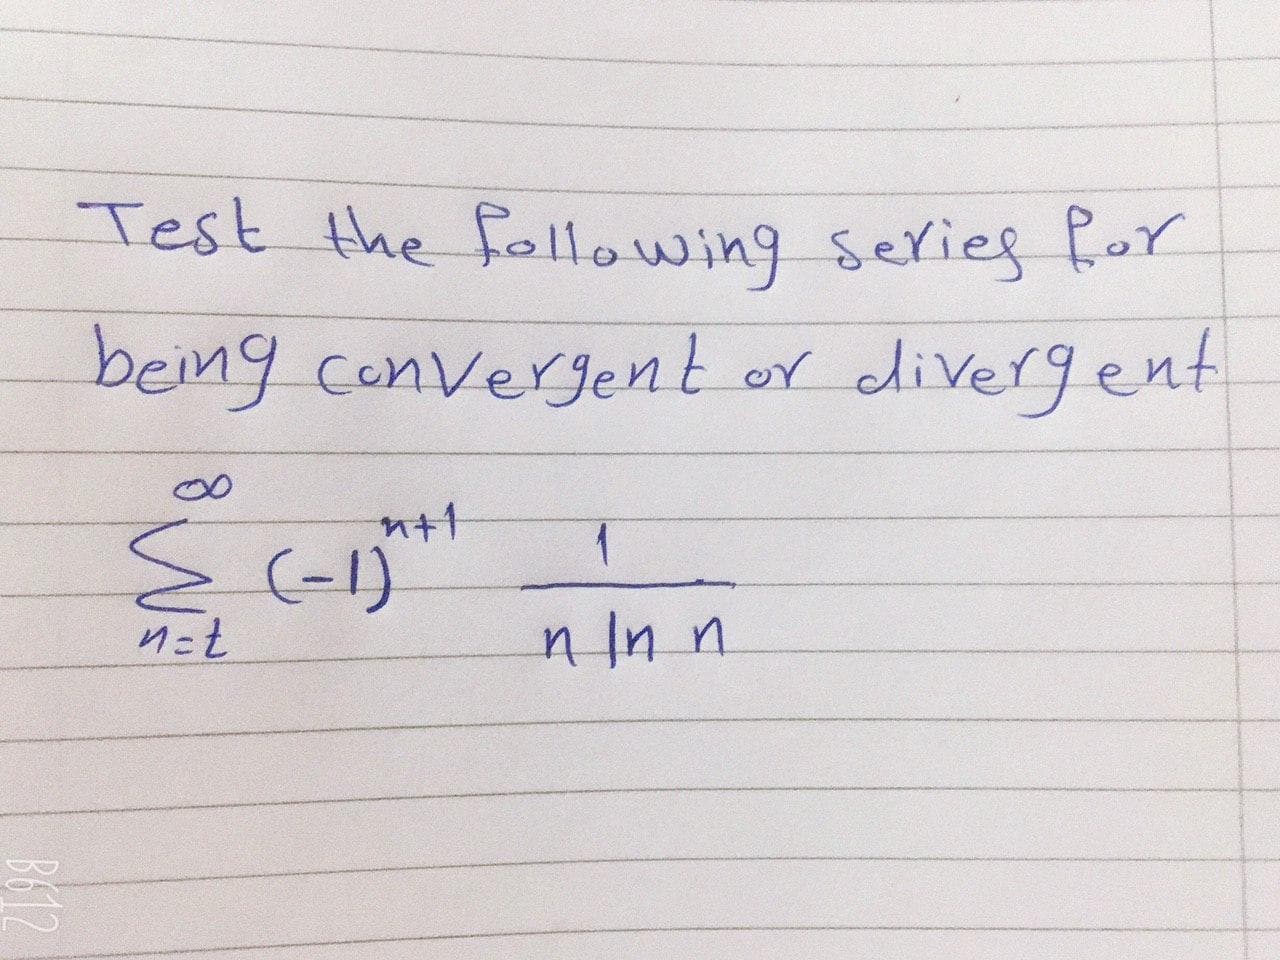 Test the fellowing series Ror
being convergJent or
divergent
n In n
